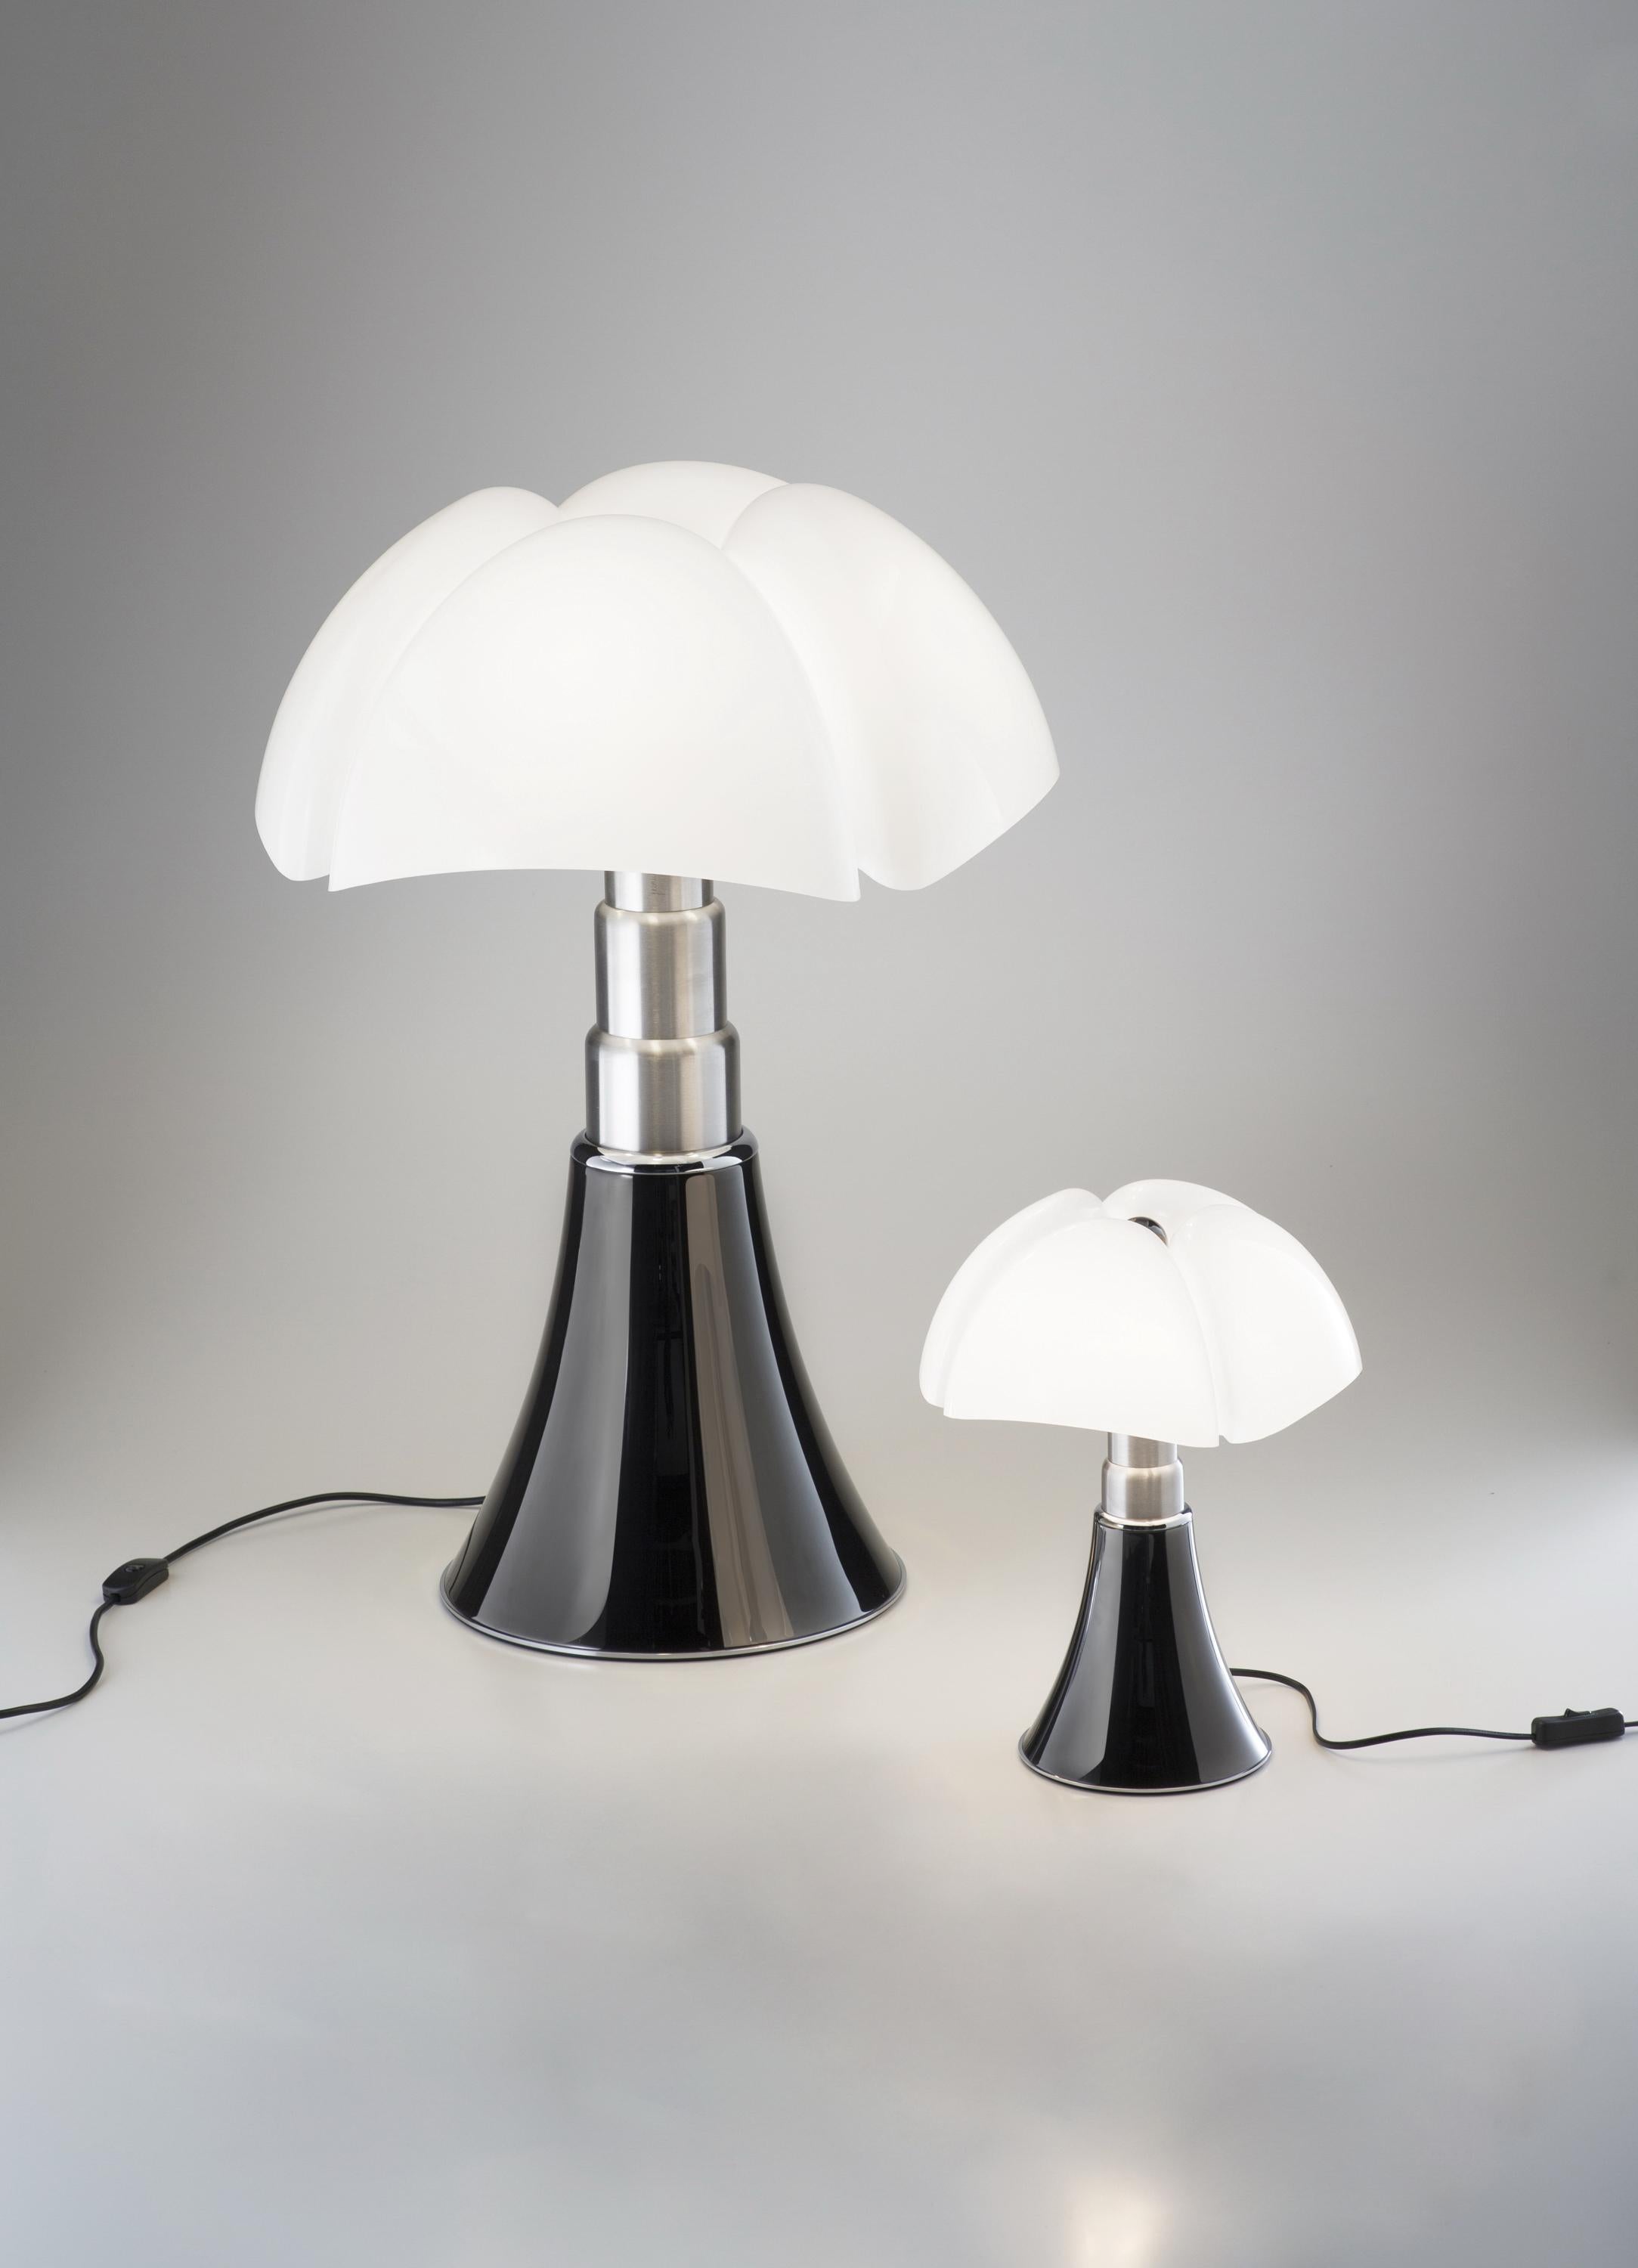 Contemporary Martinelli Luce Dimmable LED Pipistrello 620 Table Lamp by Gae Aulenti For Sale